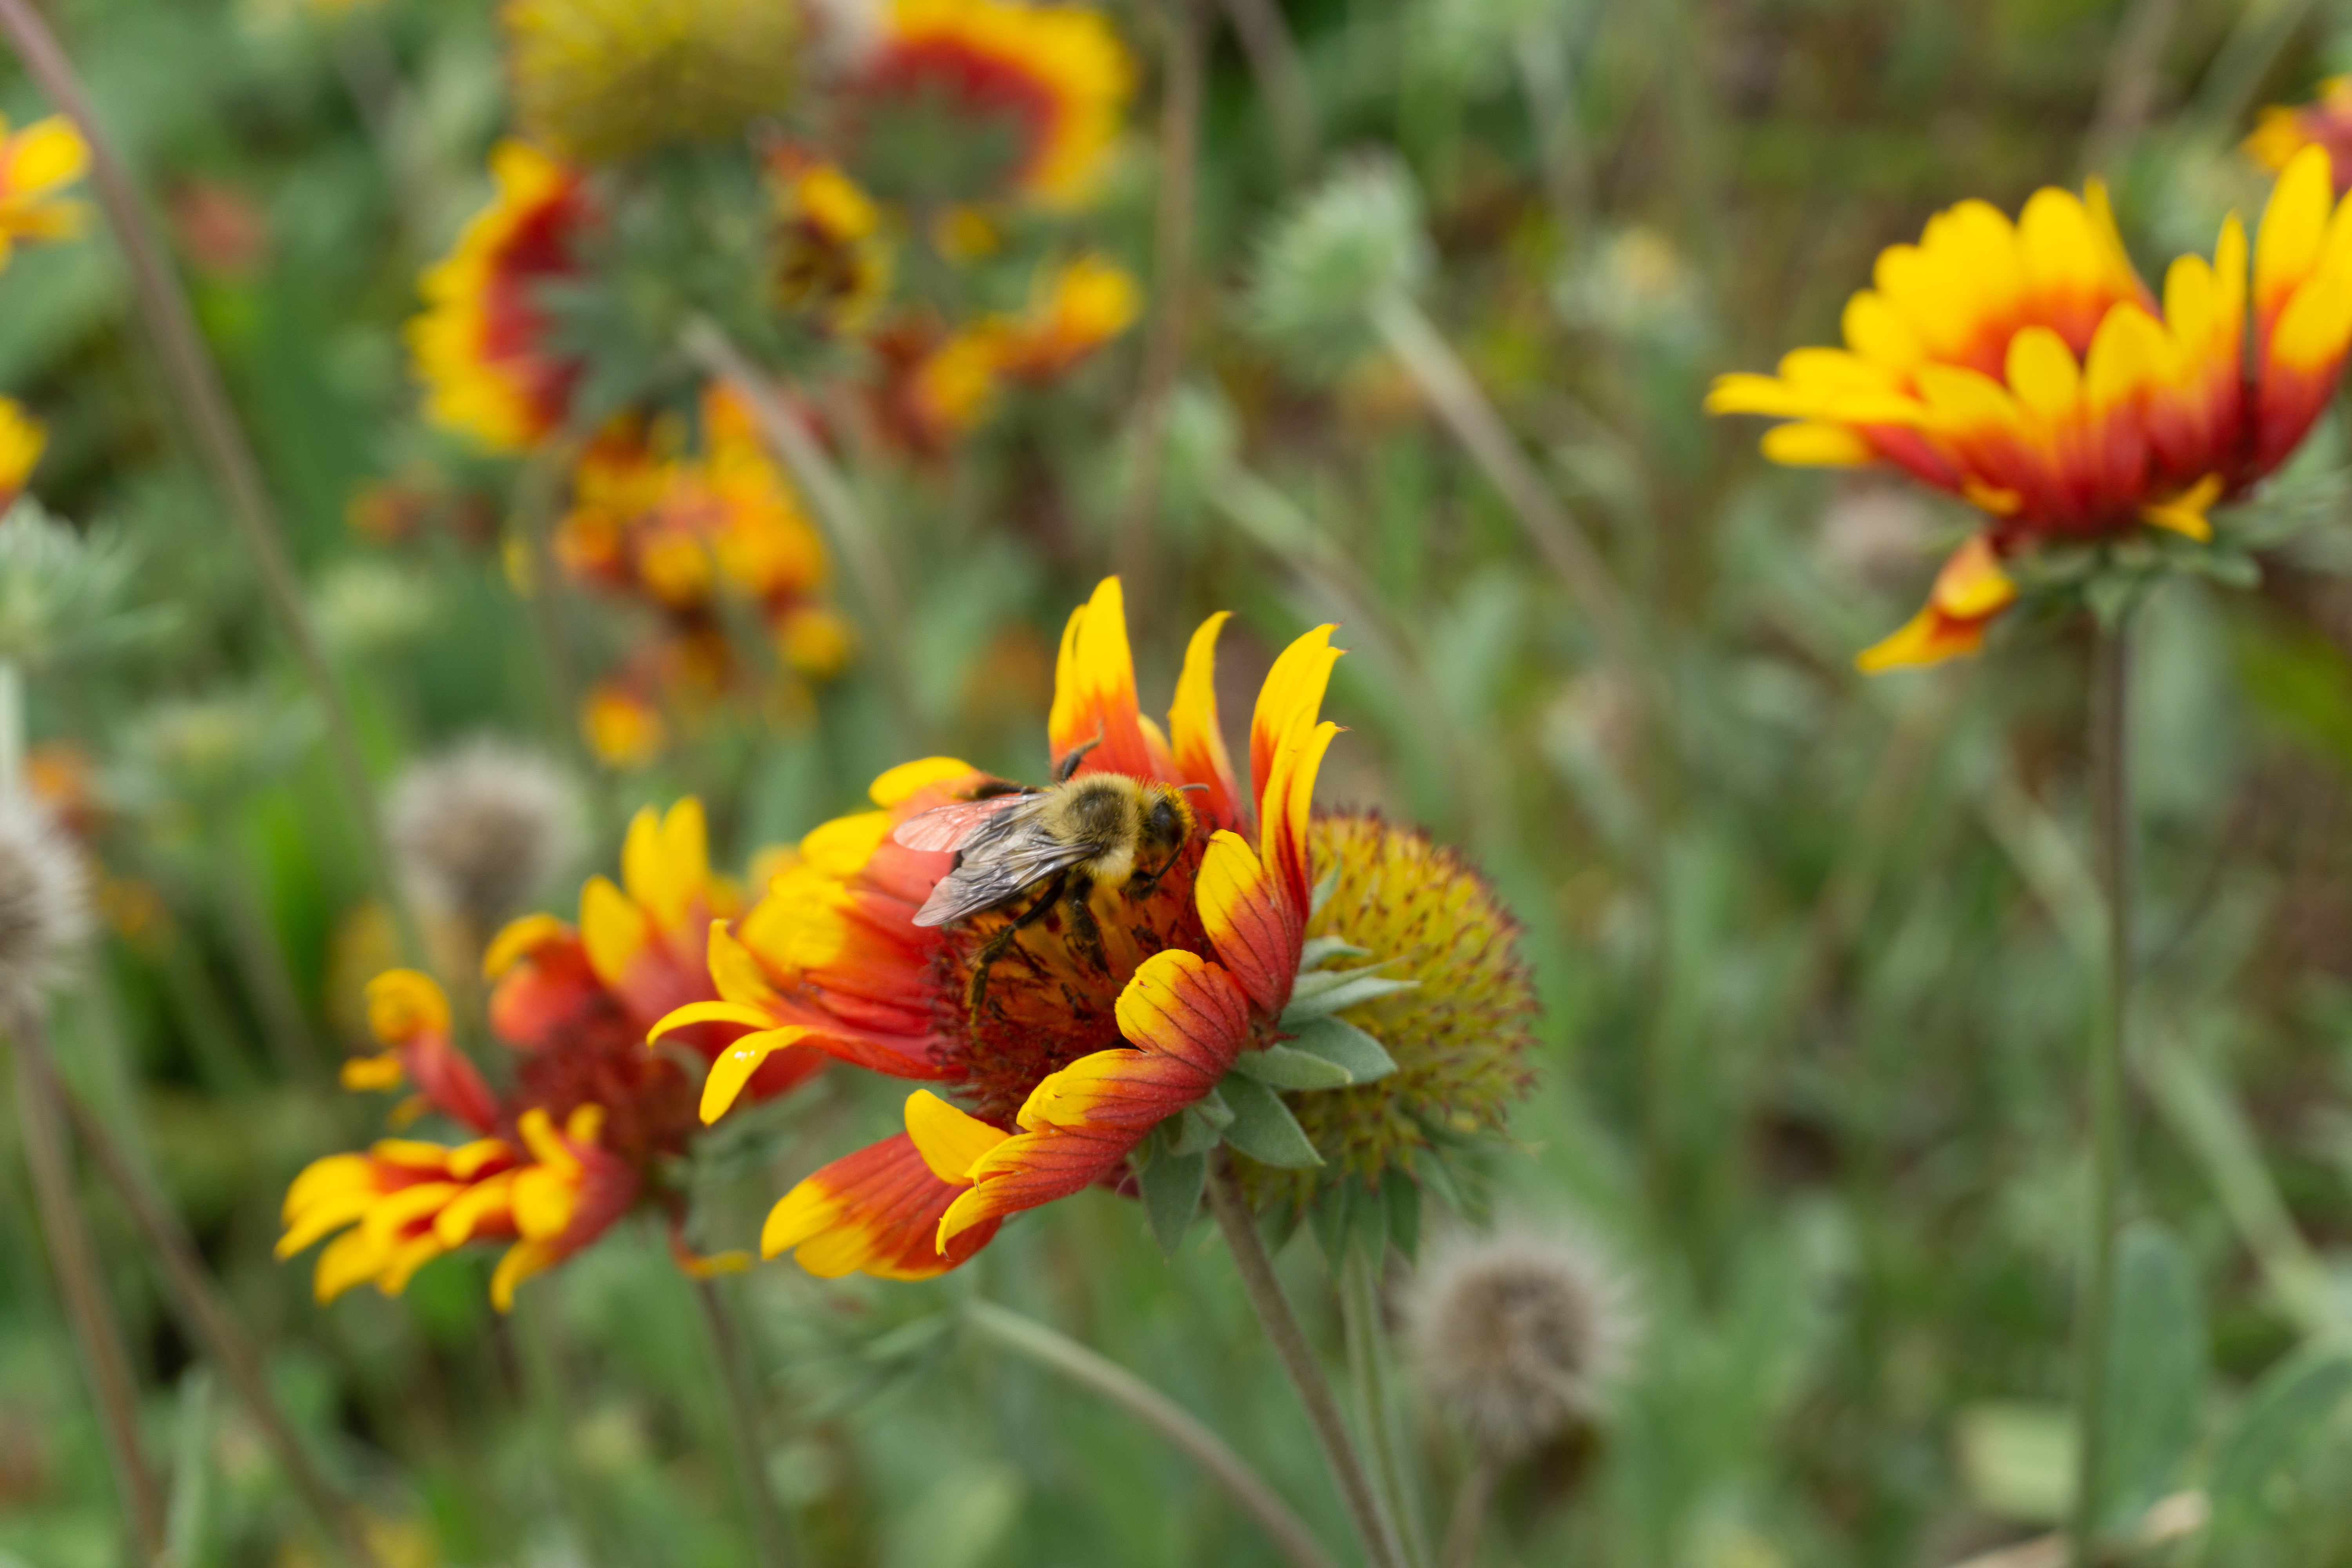 Pollination in Action on the Kingsland Wildflowers at Broadway Stages Green Roof. Photo: NYC Audubon